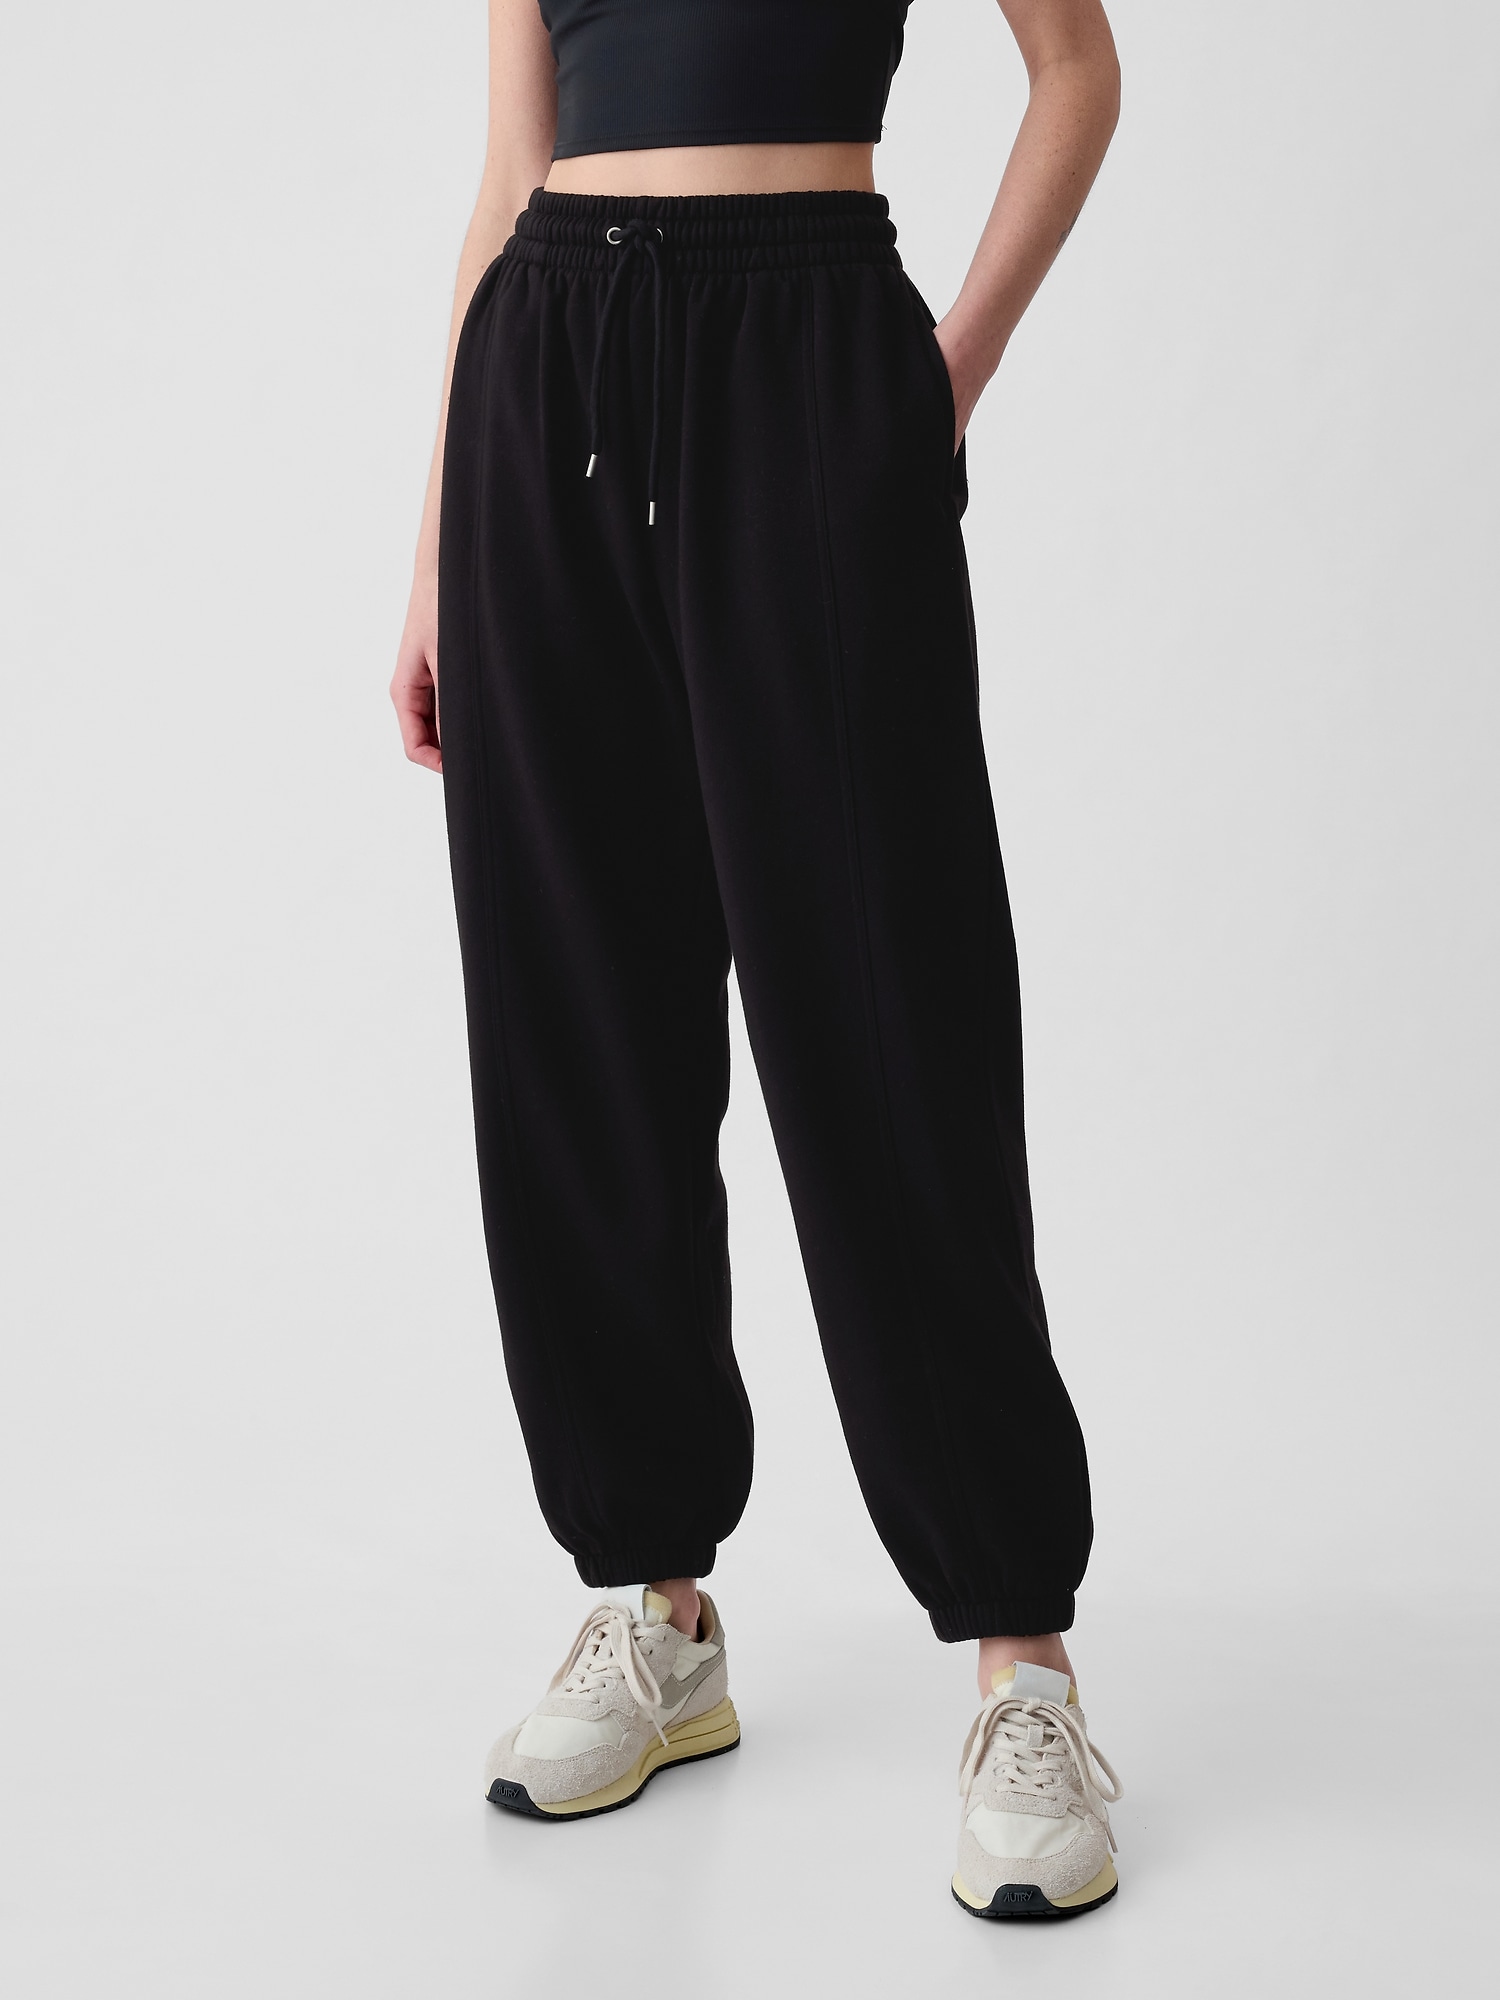 Gap Jogger Athletic Sweatsuits for Women